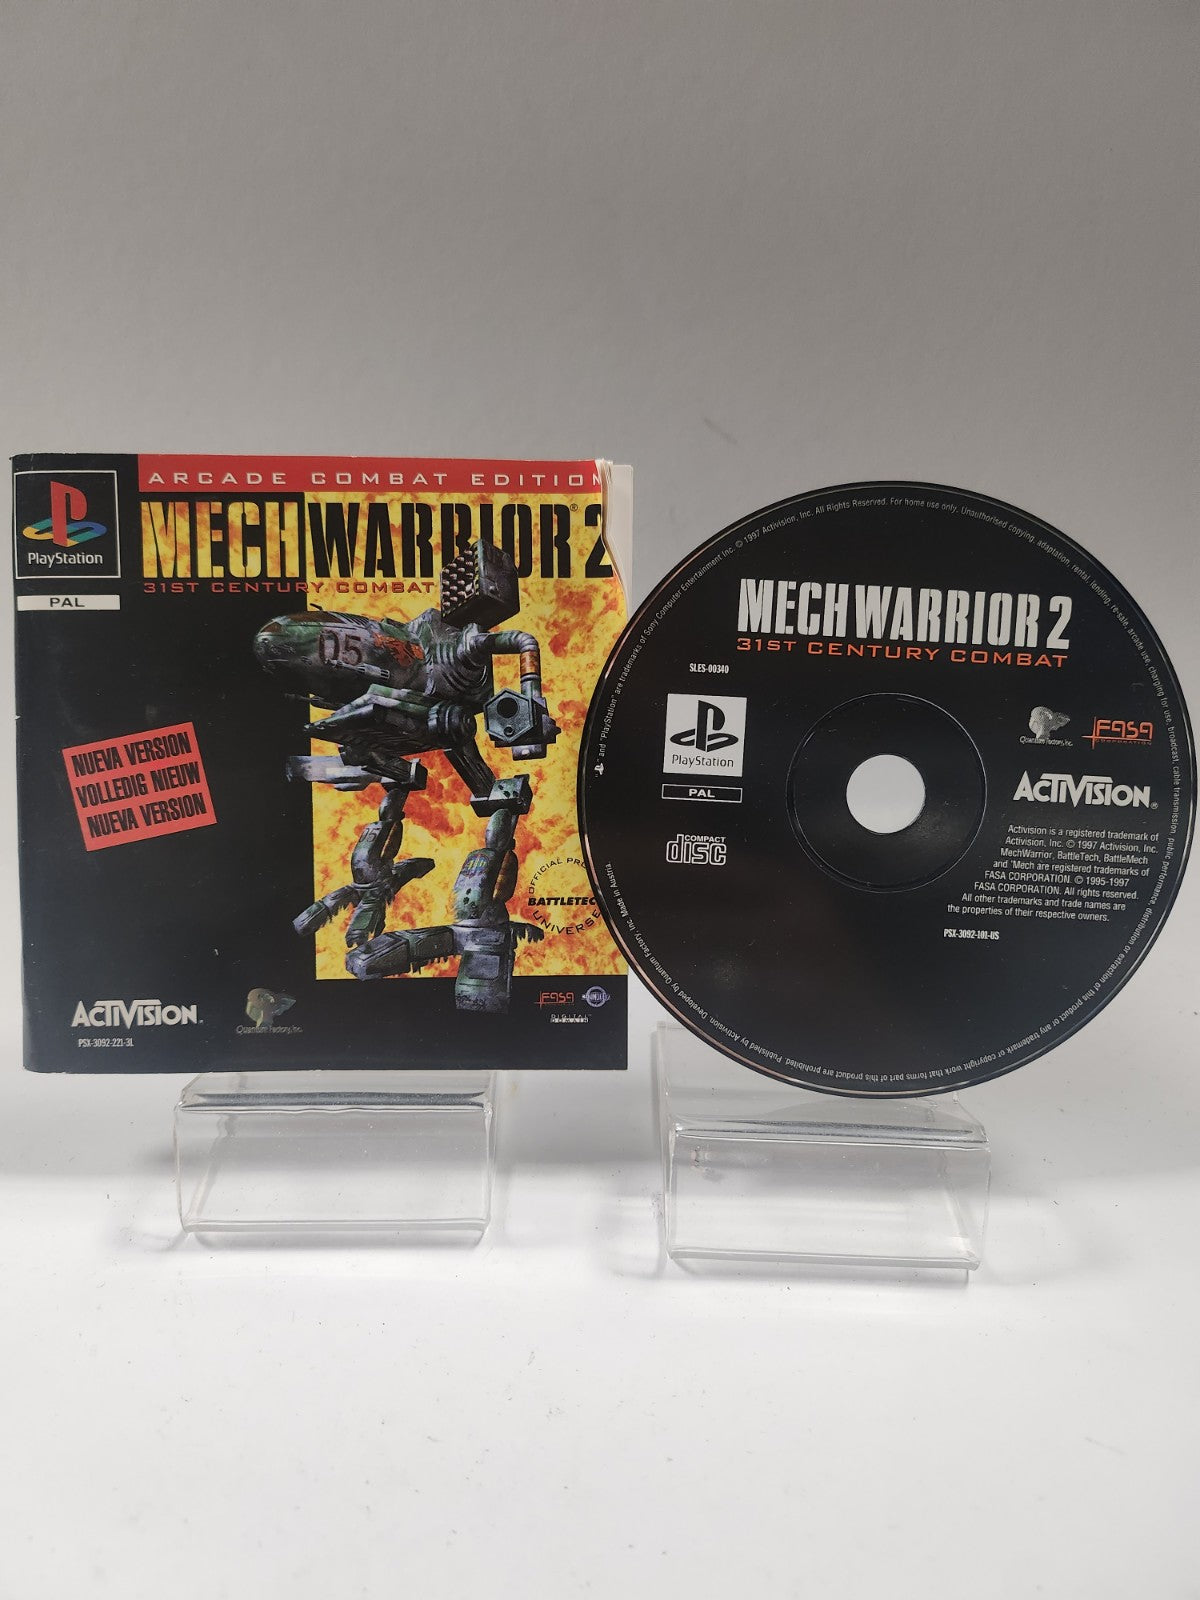 Mech Warrior 2 Arcade Combat Edition (disc & book only) PlayStation 1